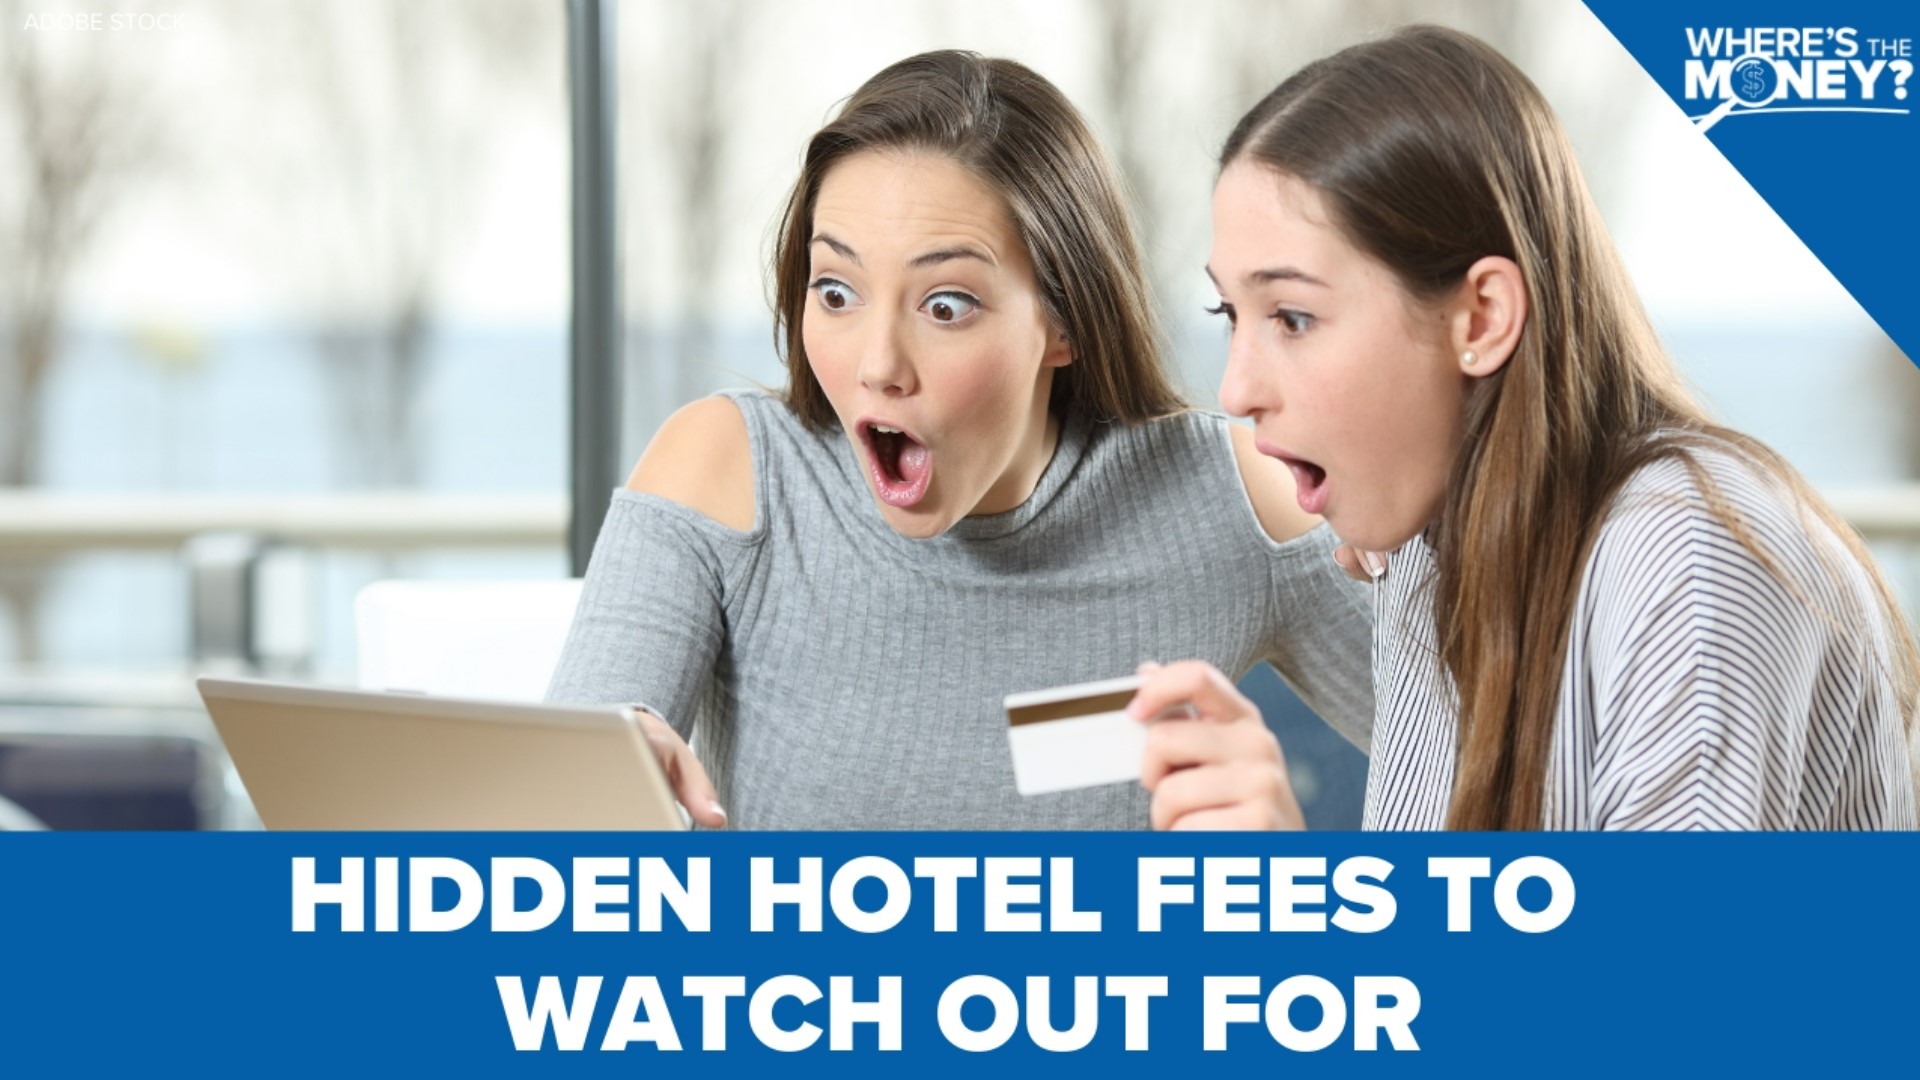 WCNC Charlotte's Carolyn Bruck reveals the hidden hotel fees you need to know about.